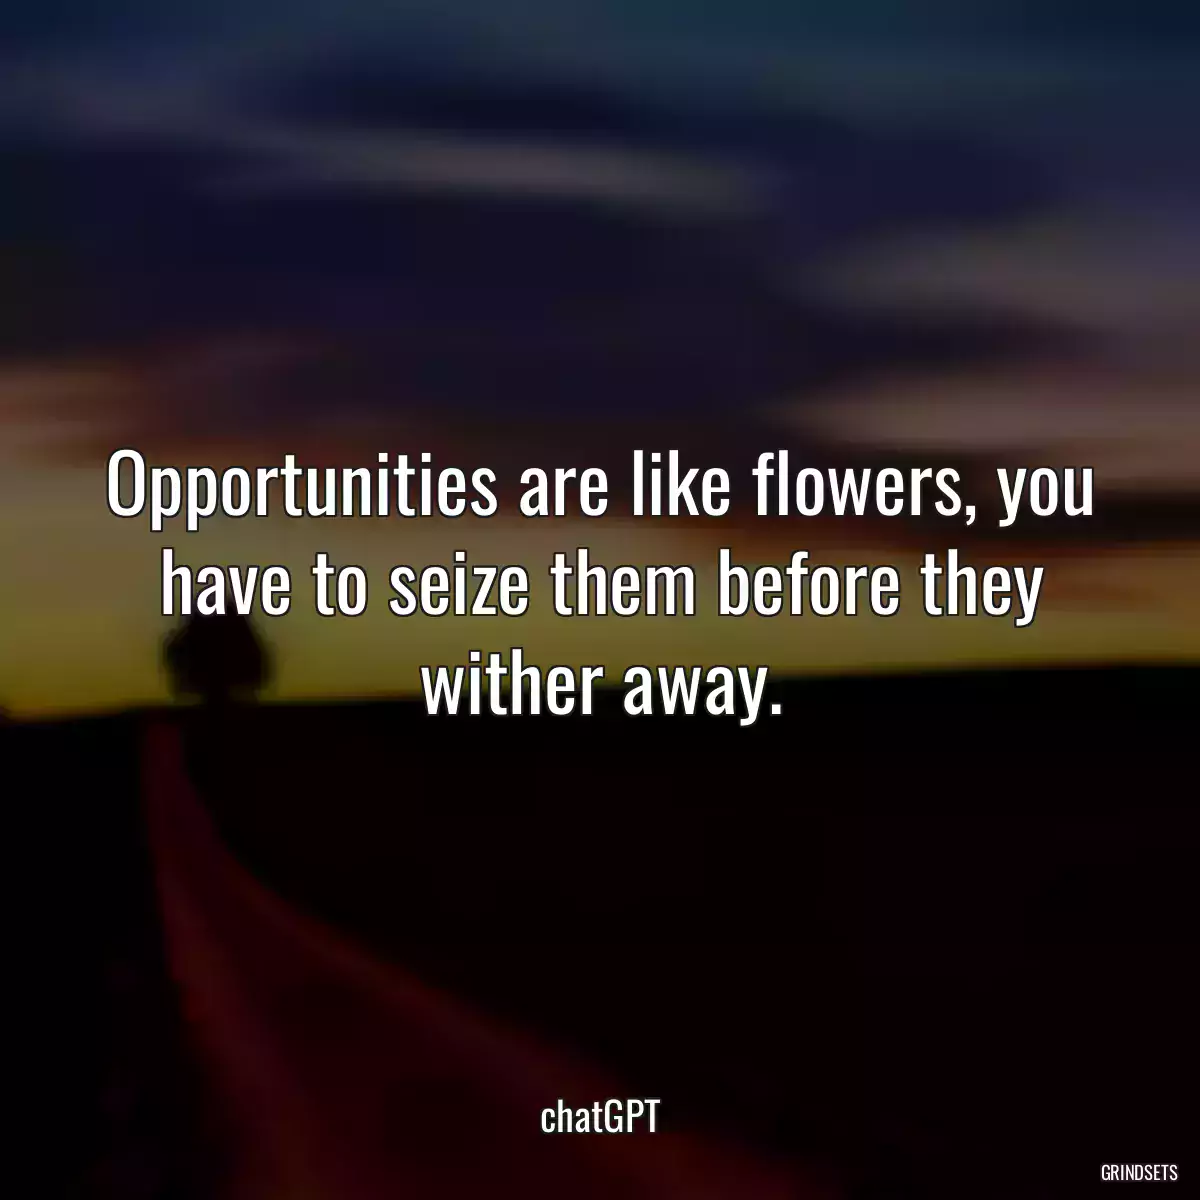 Opportunities are like flowers, you have to seize them before they wither away.